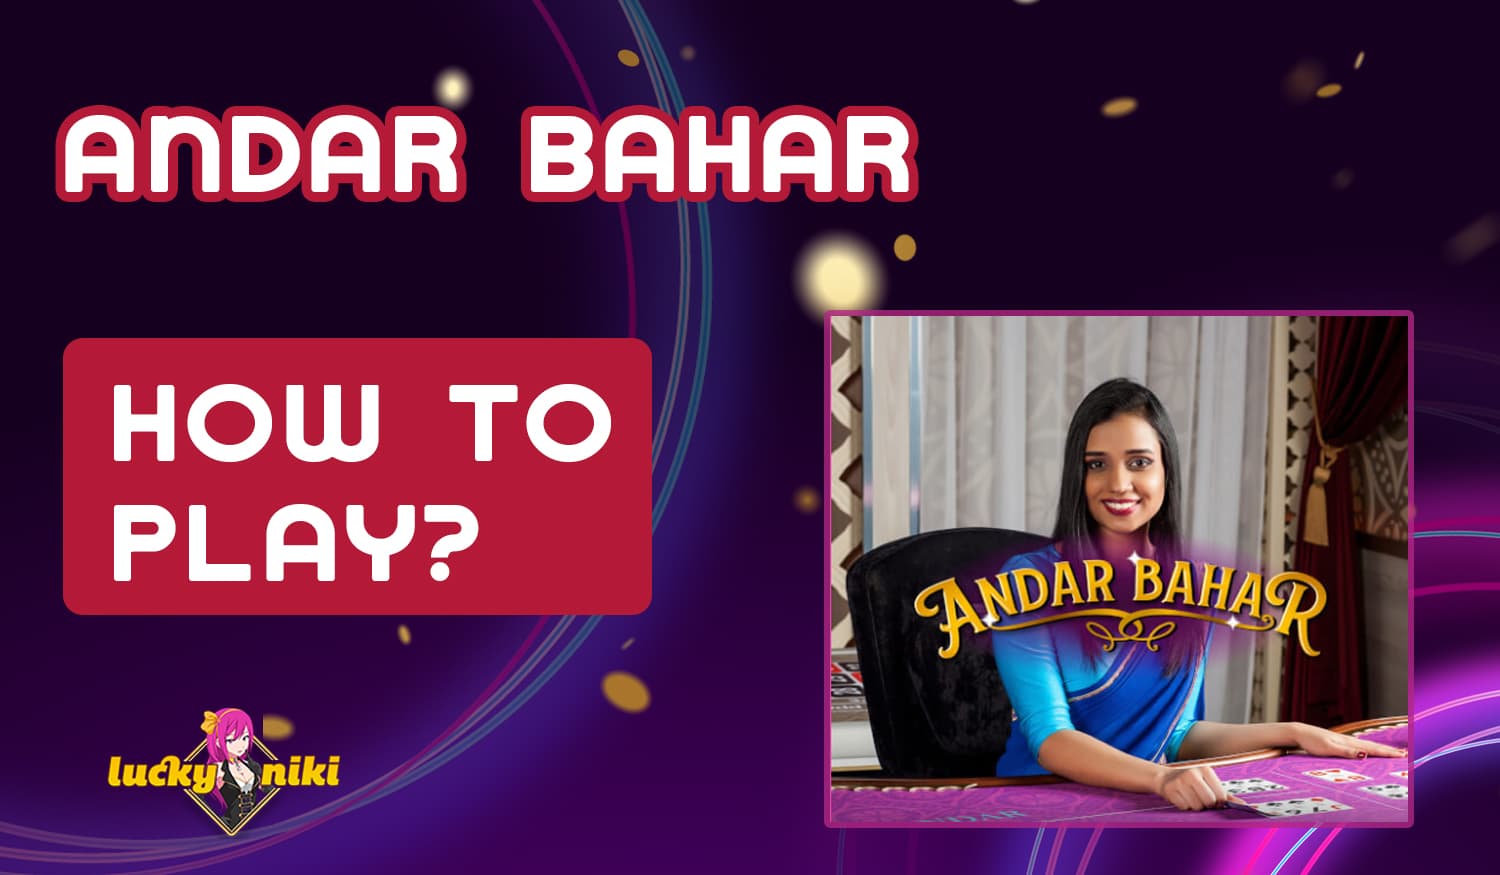 Step-by-step instructions for new users of LuckyNiki Casino from India how to start playing Andar Bahar.